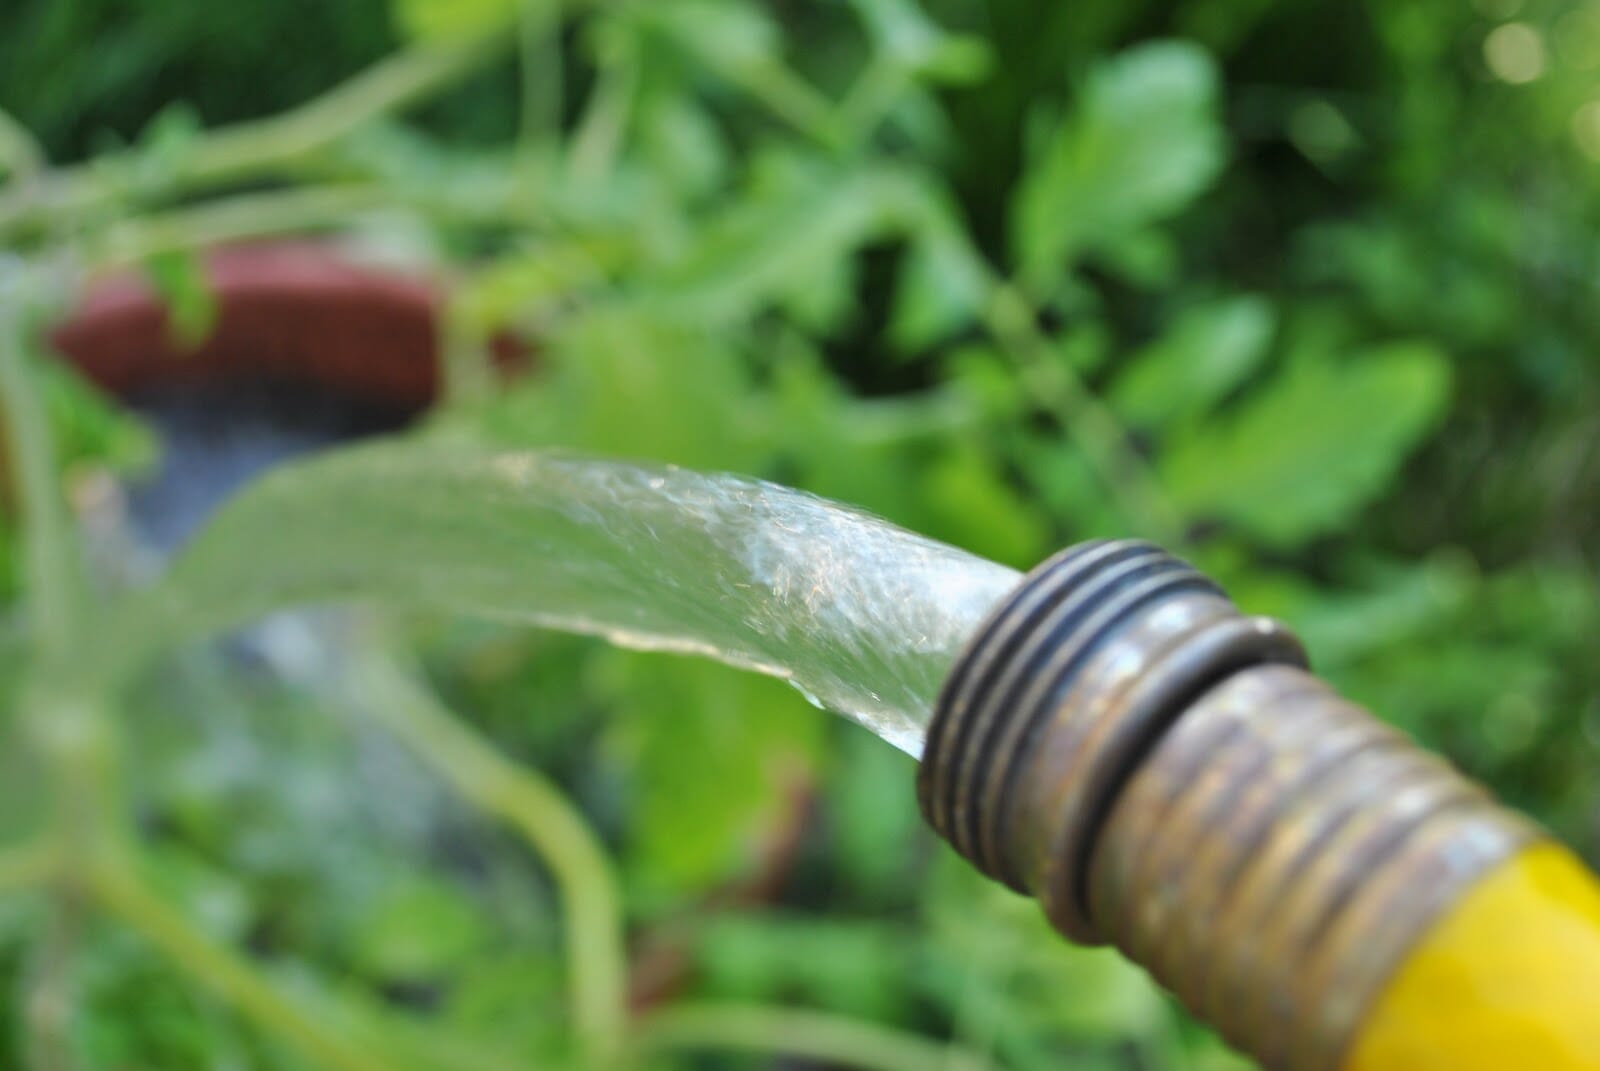 A yellow hose is watering a plant.